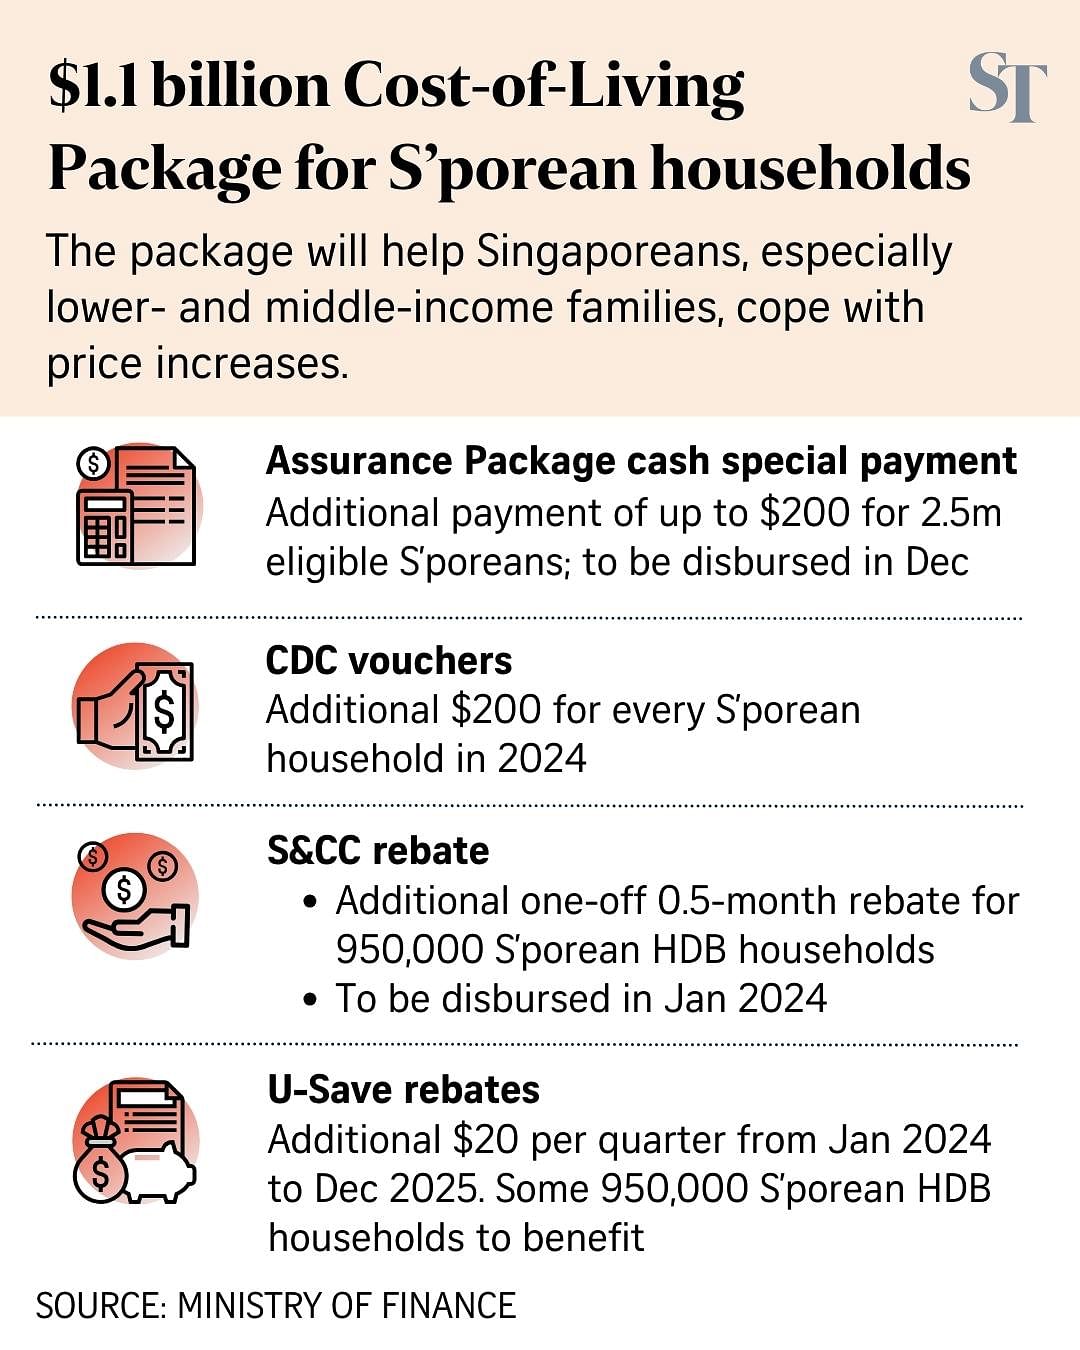 1.1b CostofLiving Package Up to 200 for 2.5m S’poreans, extra 200 CDC vouchers for S